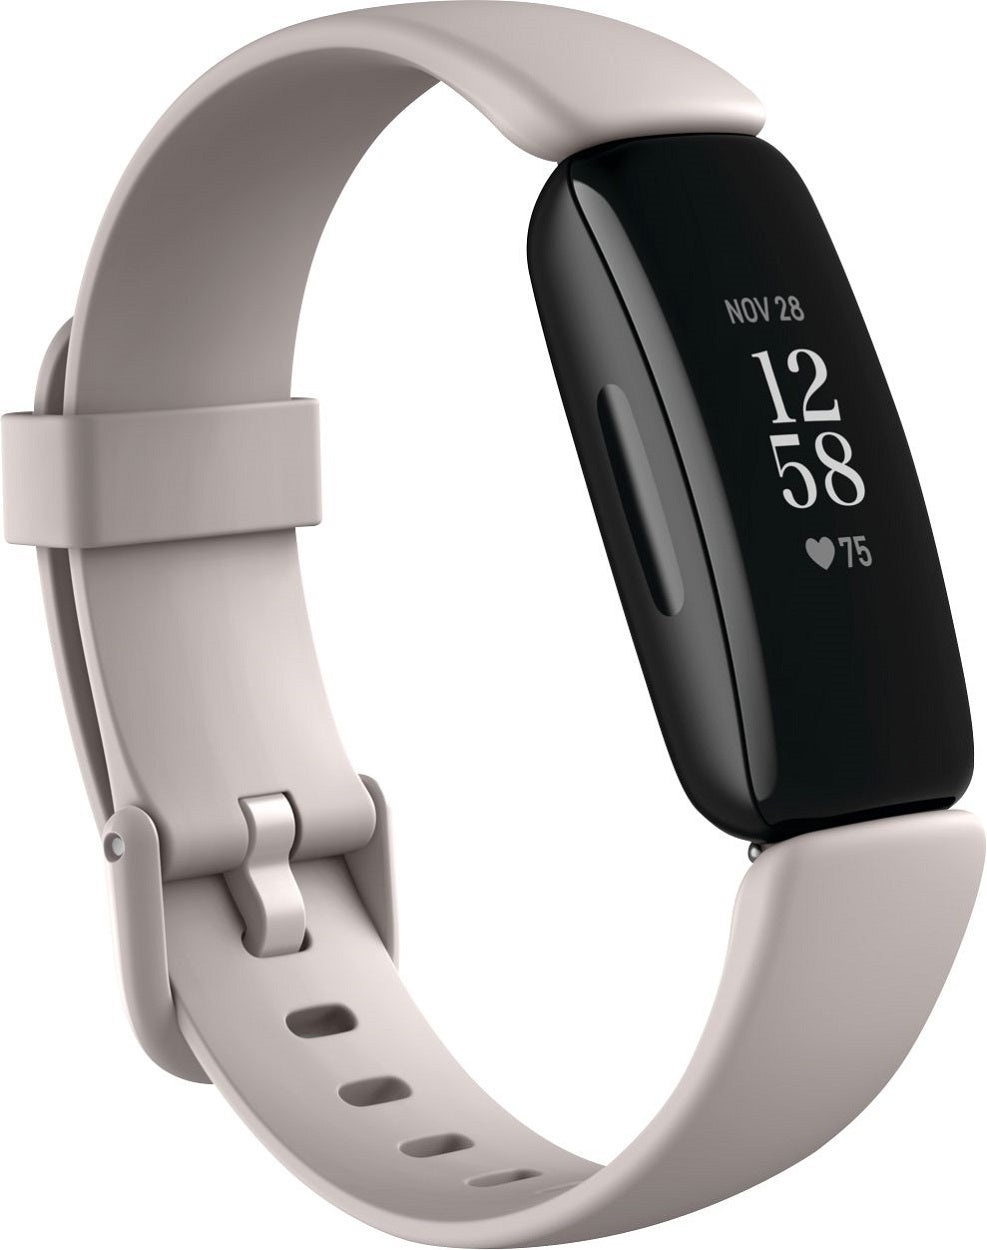 Fitbit Inspire 2 Health &amp; Fitness Tracker with 24/7 Heart Rate - Lunar White (New)